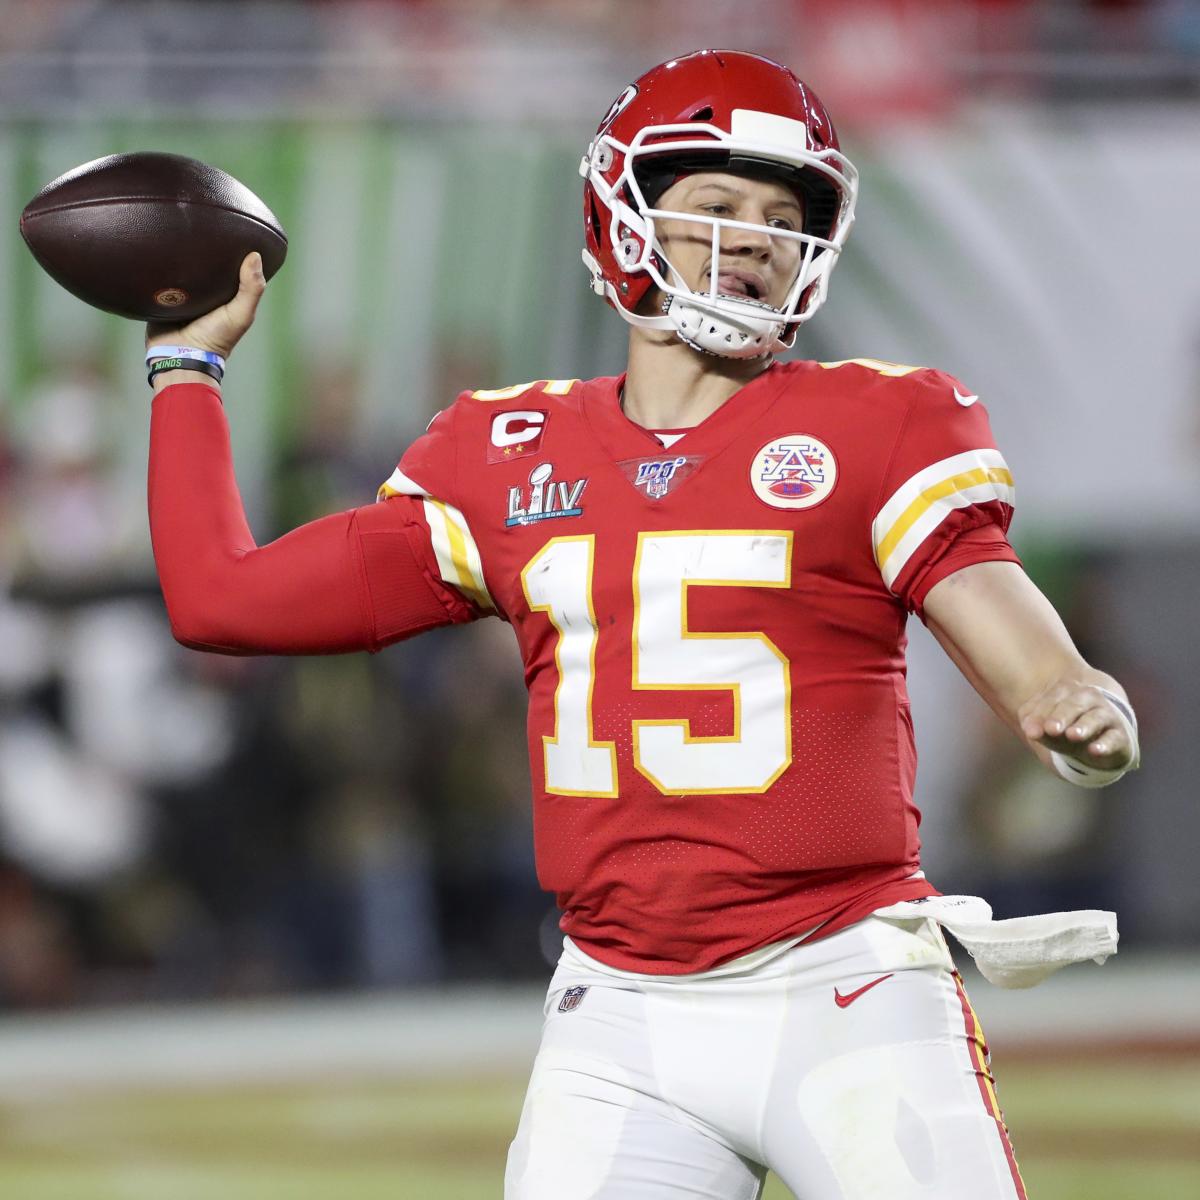 Patrick Mahomes, Russell Wilson Headline Top 10 Madden NFL 21 QB Participant Ratings